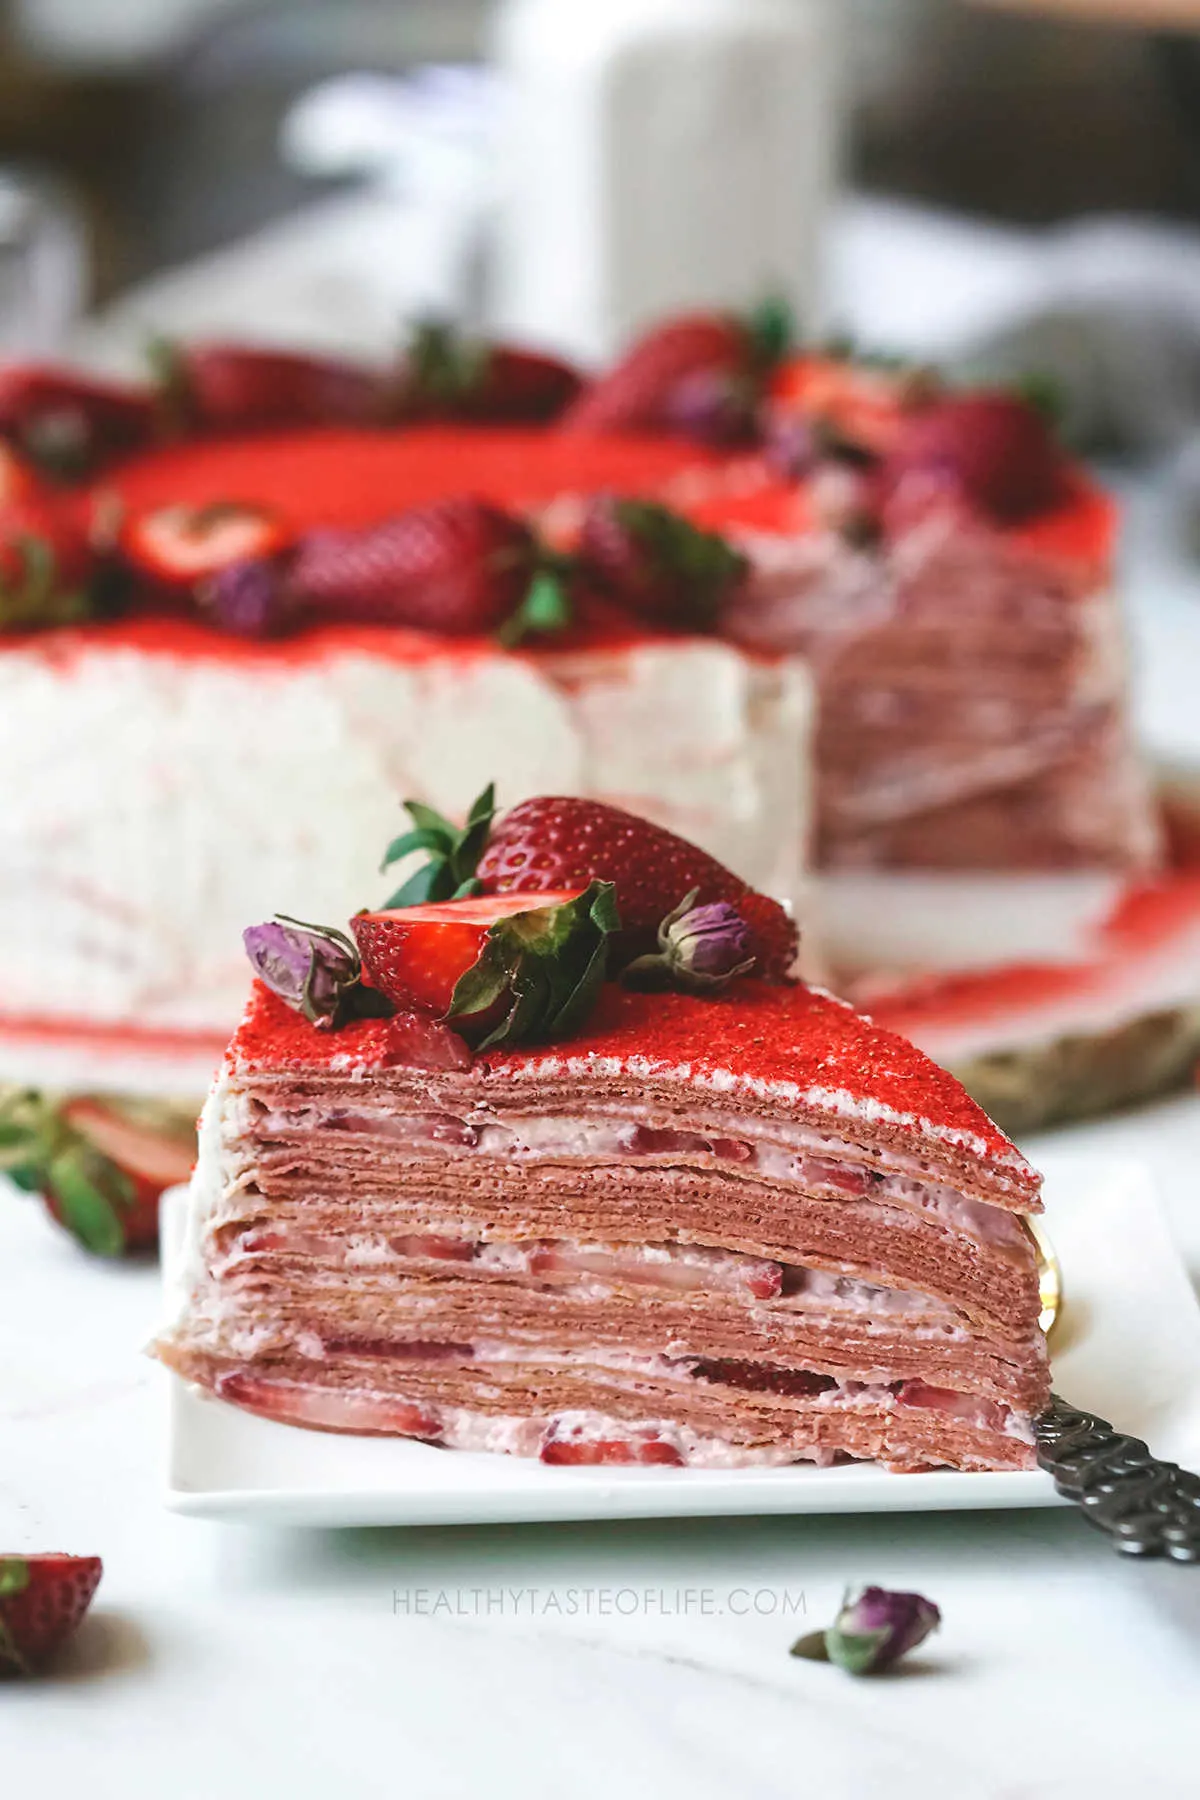 A slice of strawberry crepe cake with fresh strawberries showing how the layers look inside.